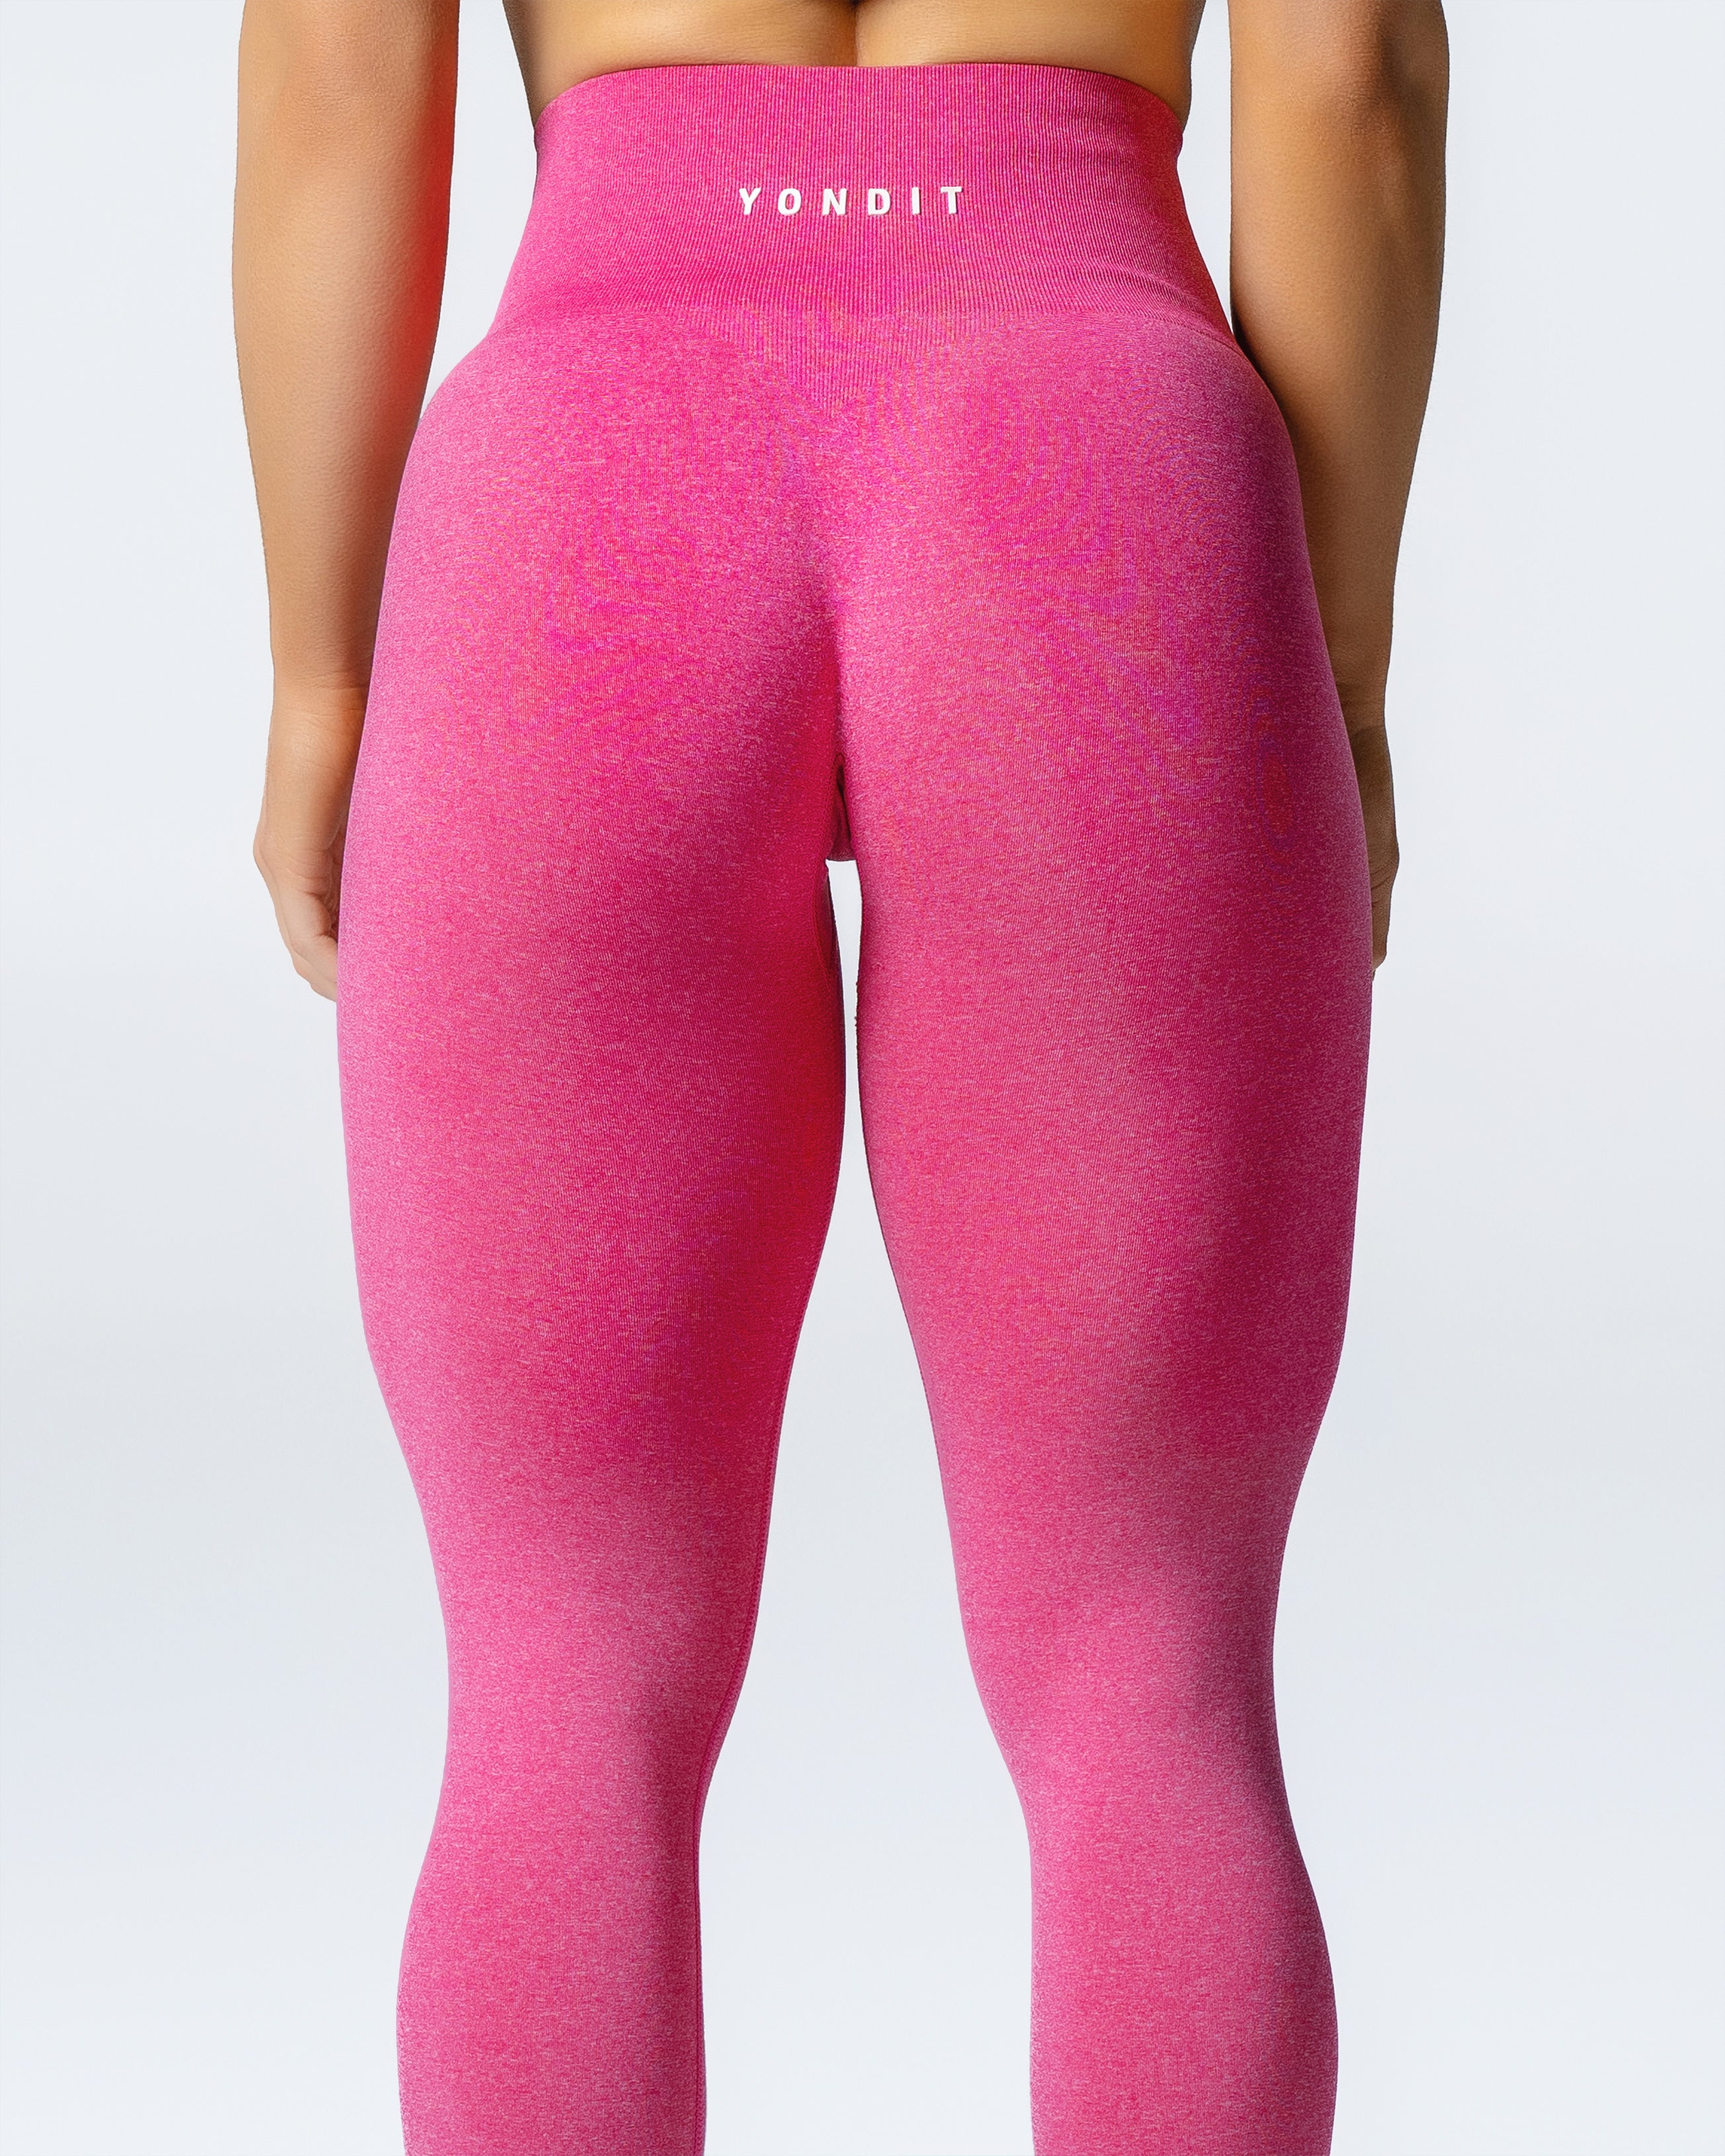 HIIT seamless leggings in pink fade レディース - 靴下・レッグウェア